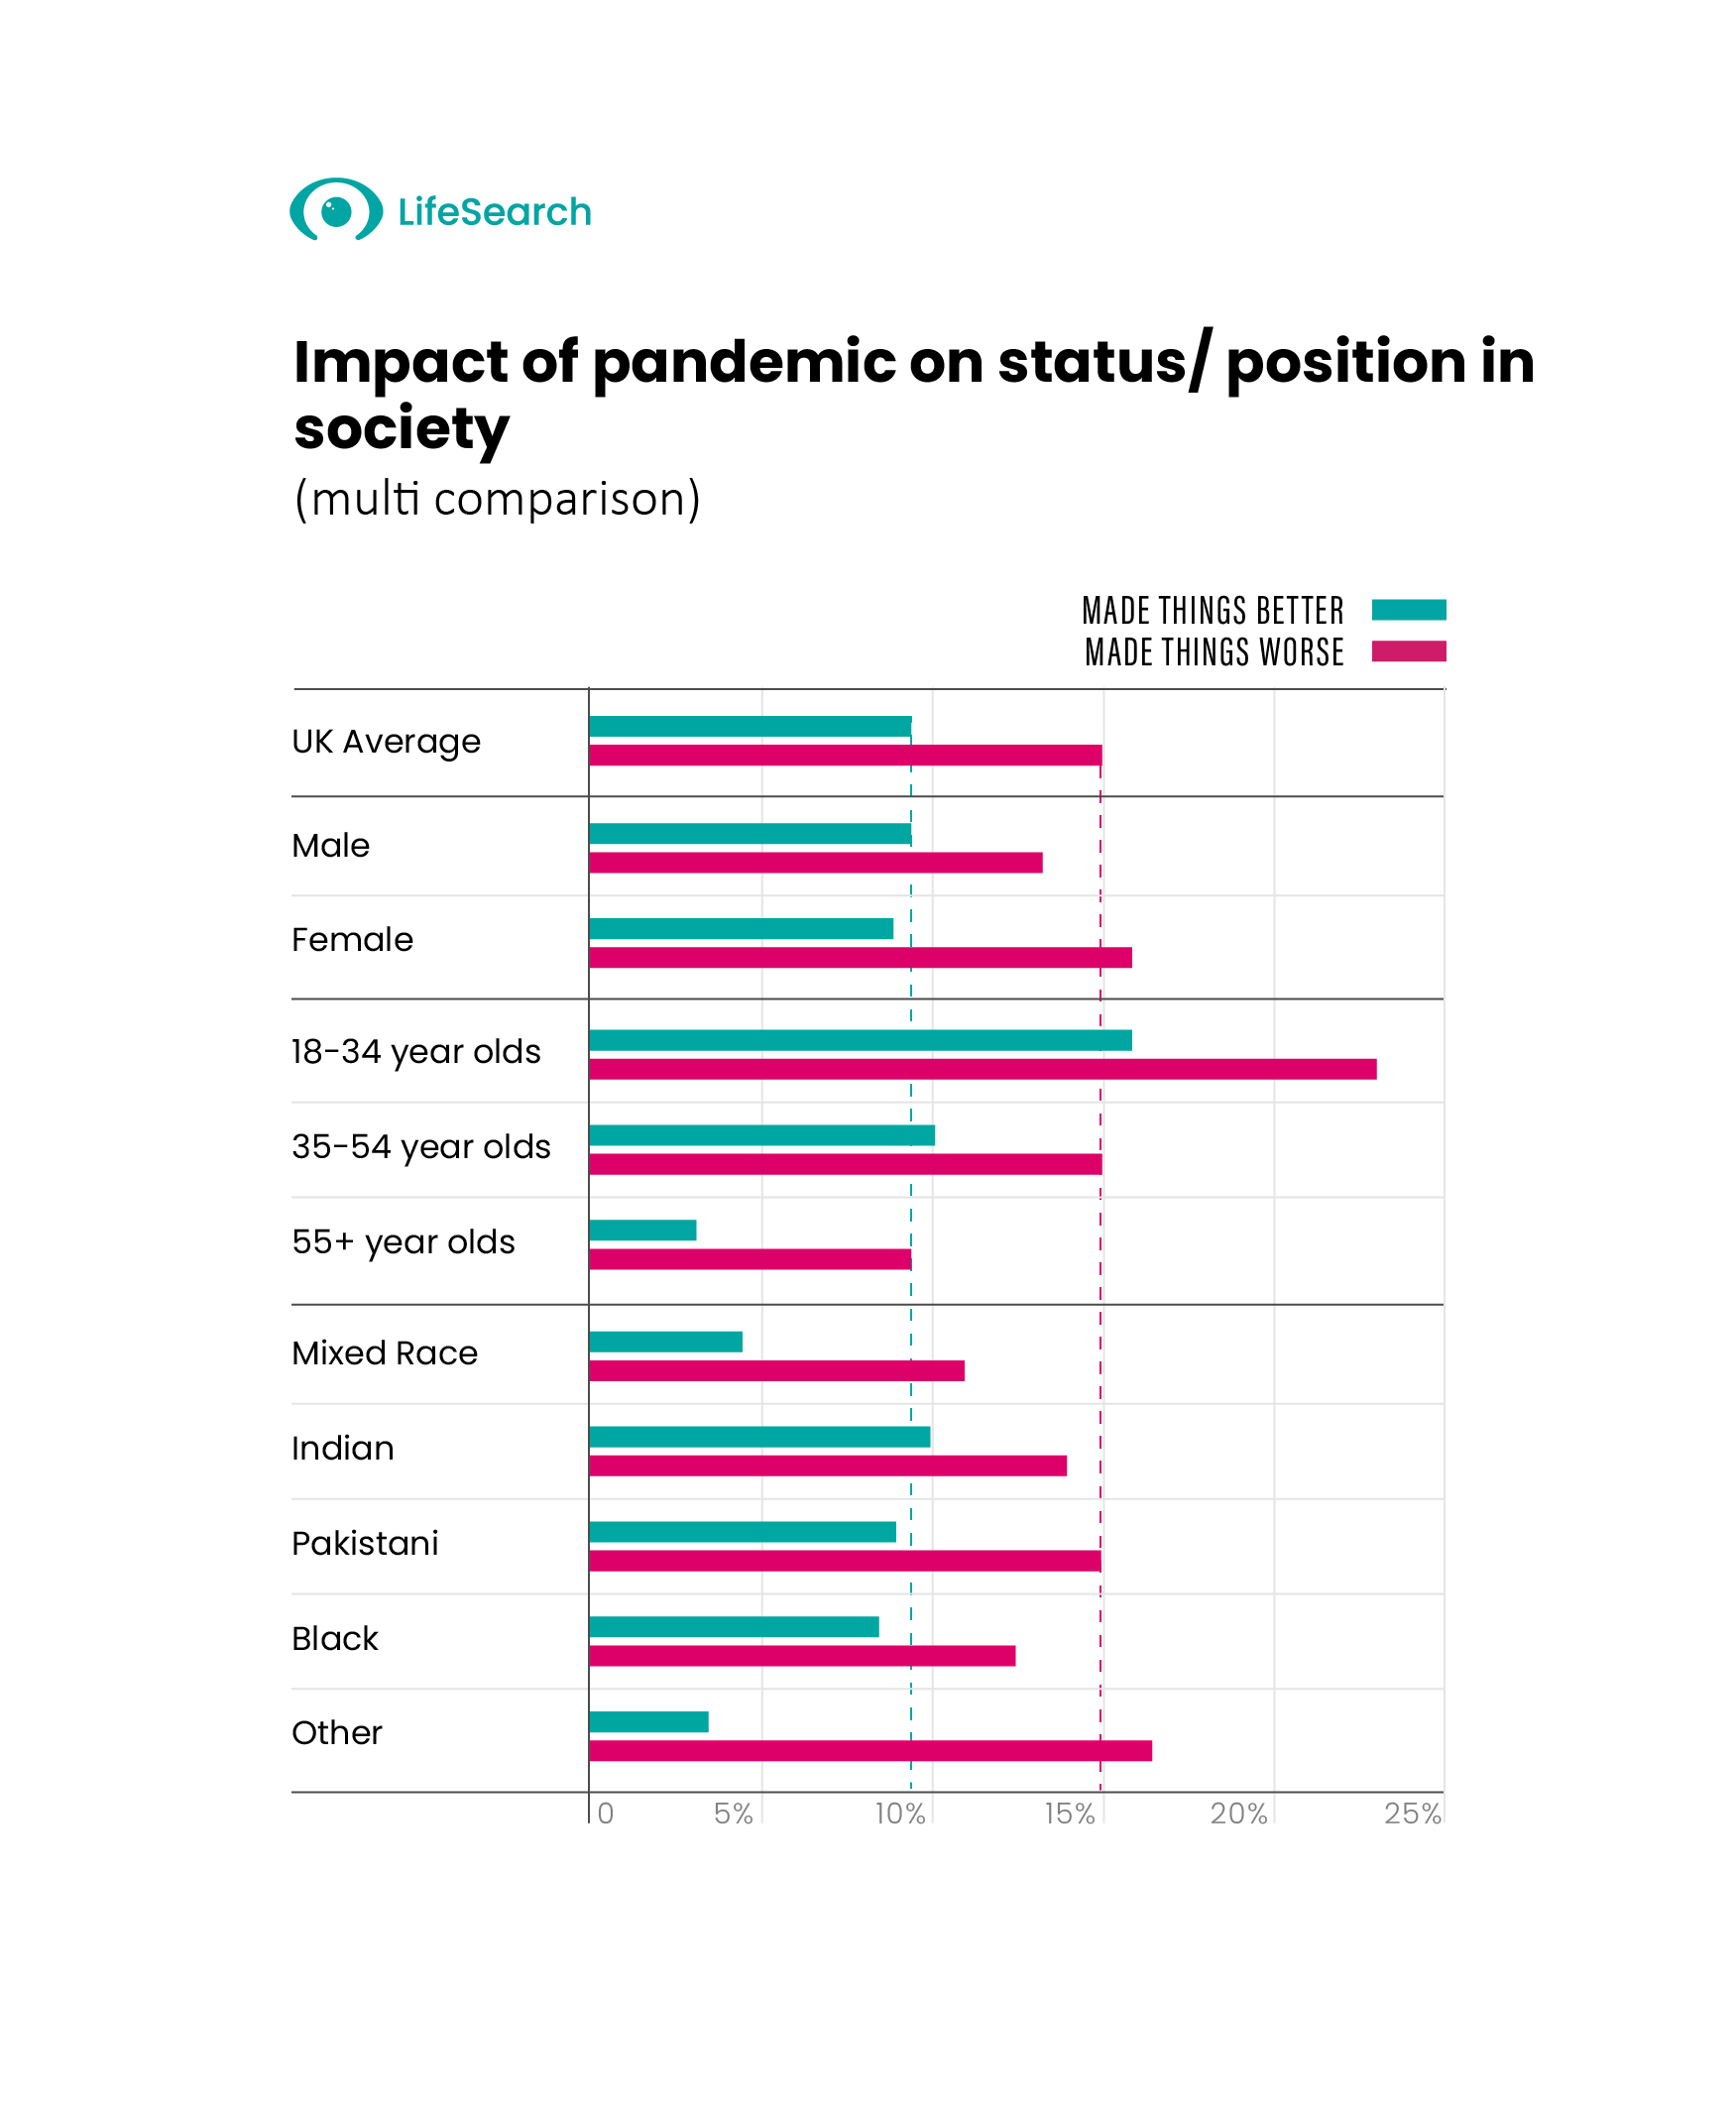 Impact of pandemic on status/position in society